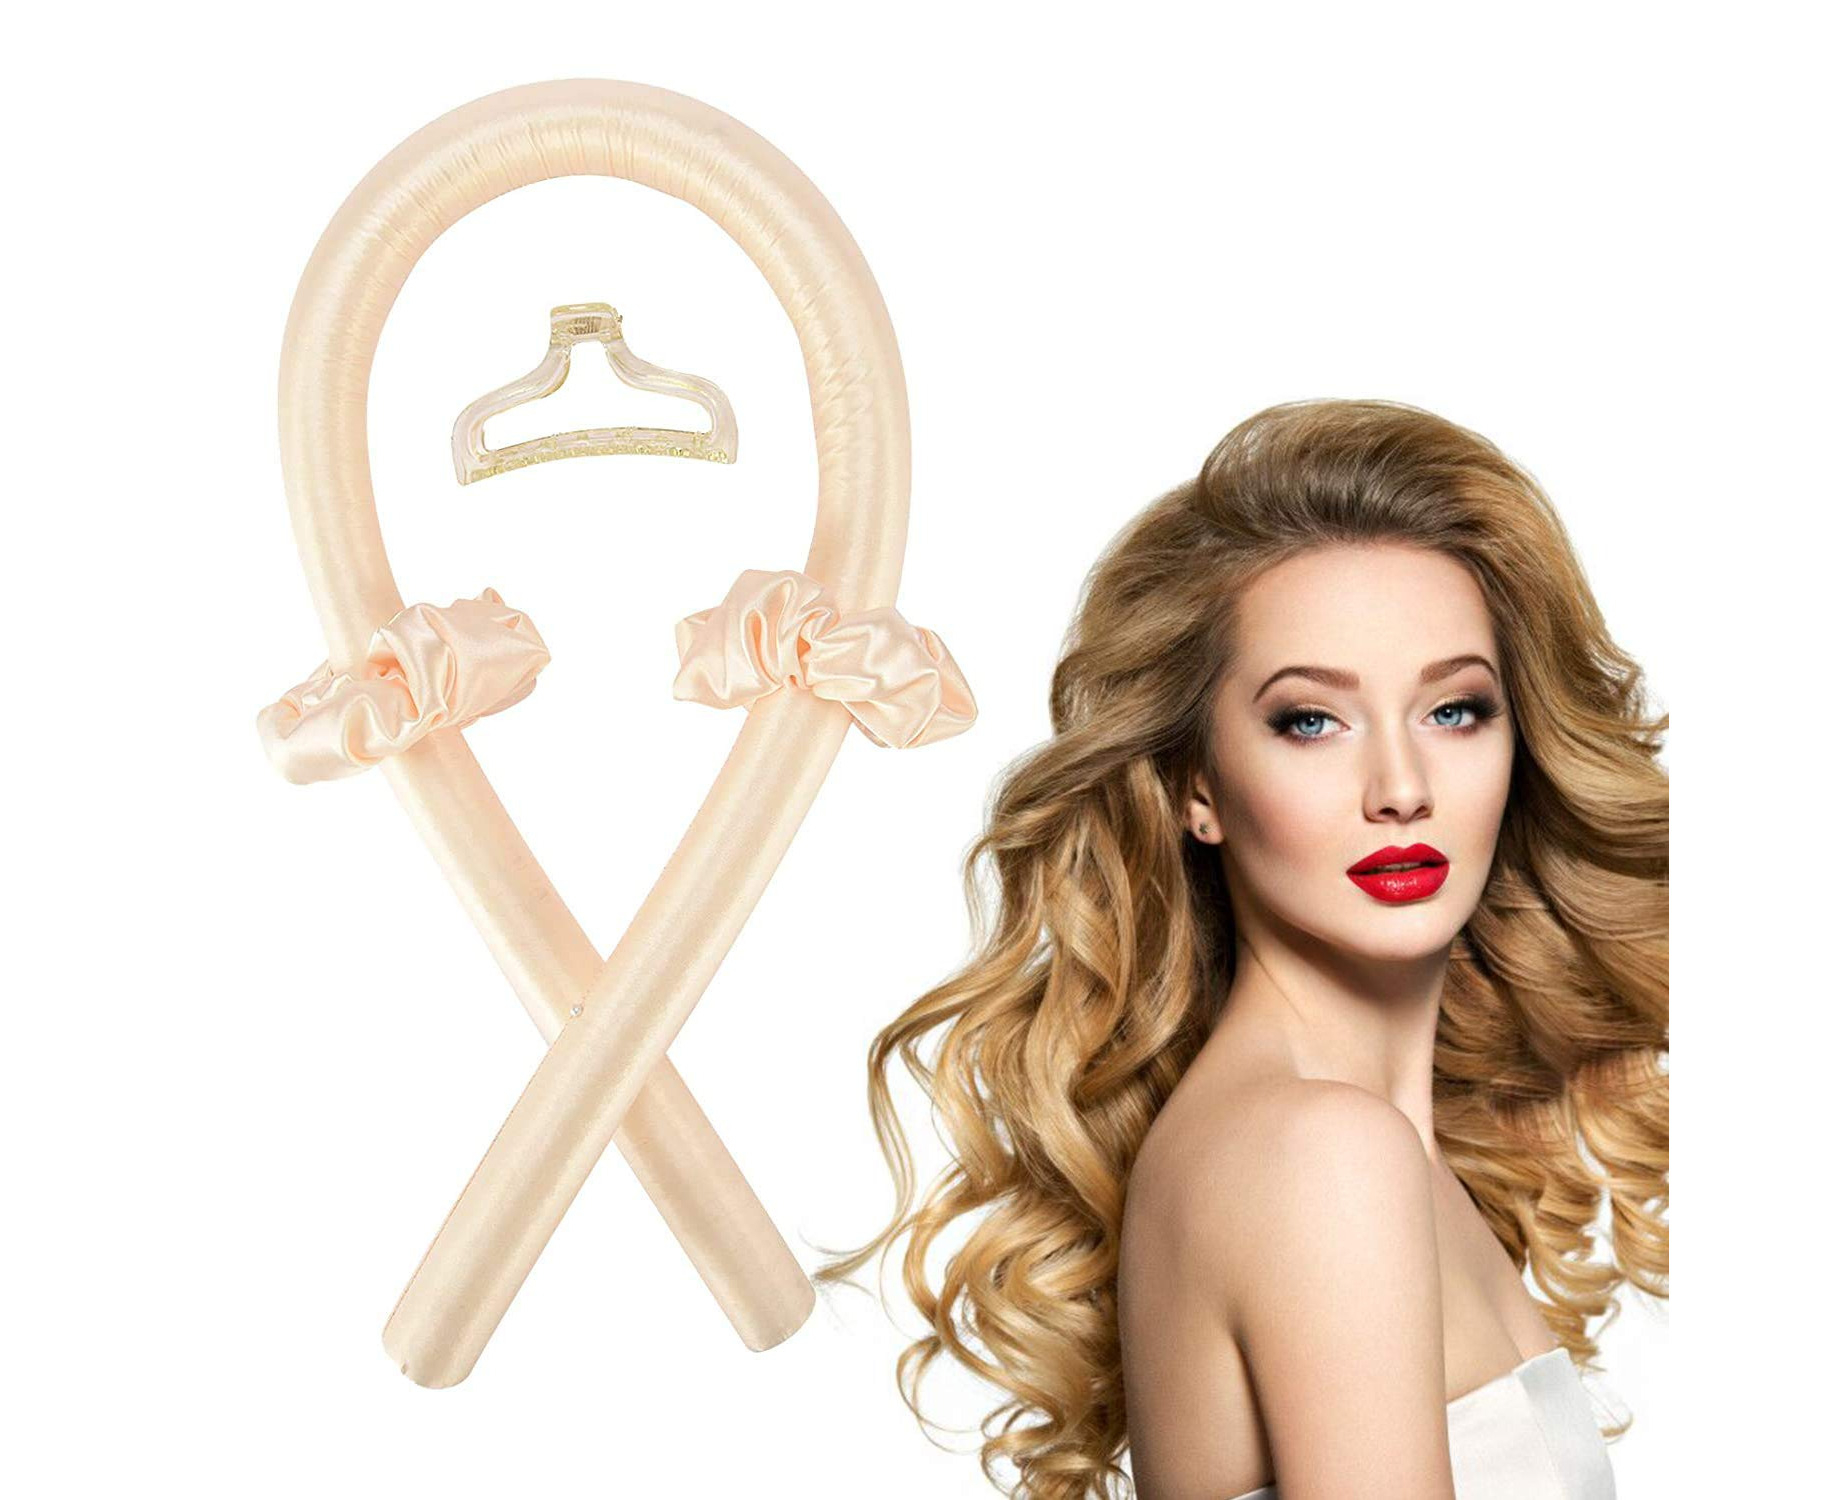 Heatless Curlers, Heatless Curling Rod Headband,Curling Irons Silk Hair  Clips Can Used to Maintain Wavy Shape of Medium-Long Hair - Pink |  Www.catch.com.au